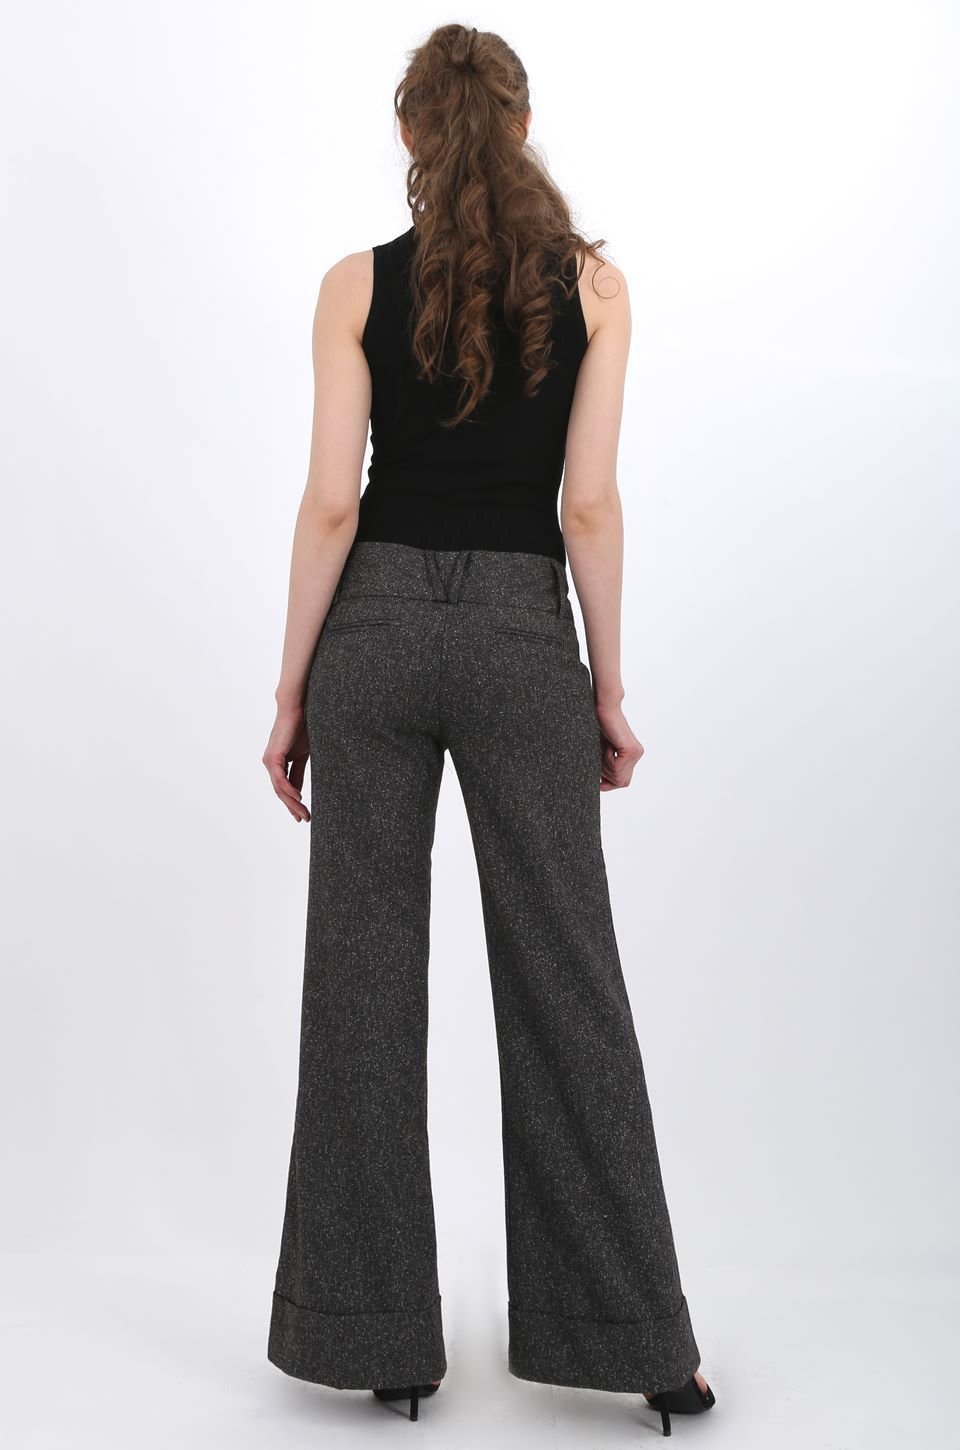 MISS PINKI Ayla tailored vintage cuffed work pants in Charcoal